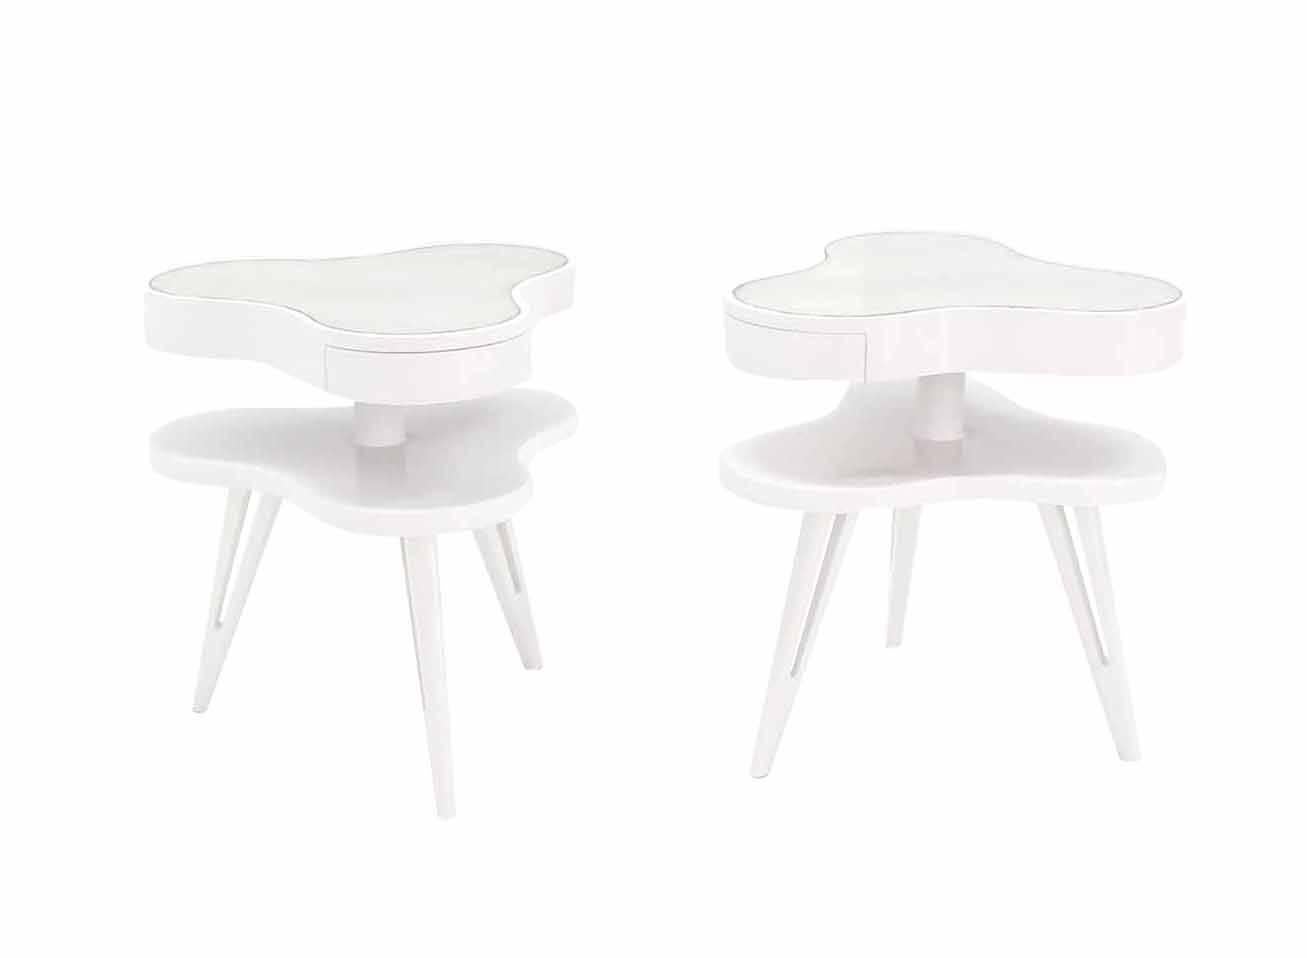 American Pair of White Lacquer Pierced Legs Organic Shape End Tables For Sale